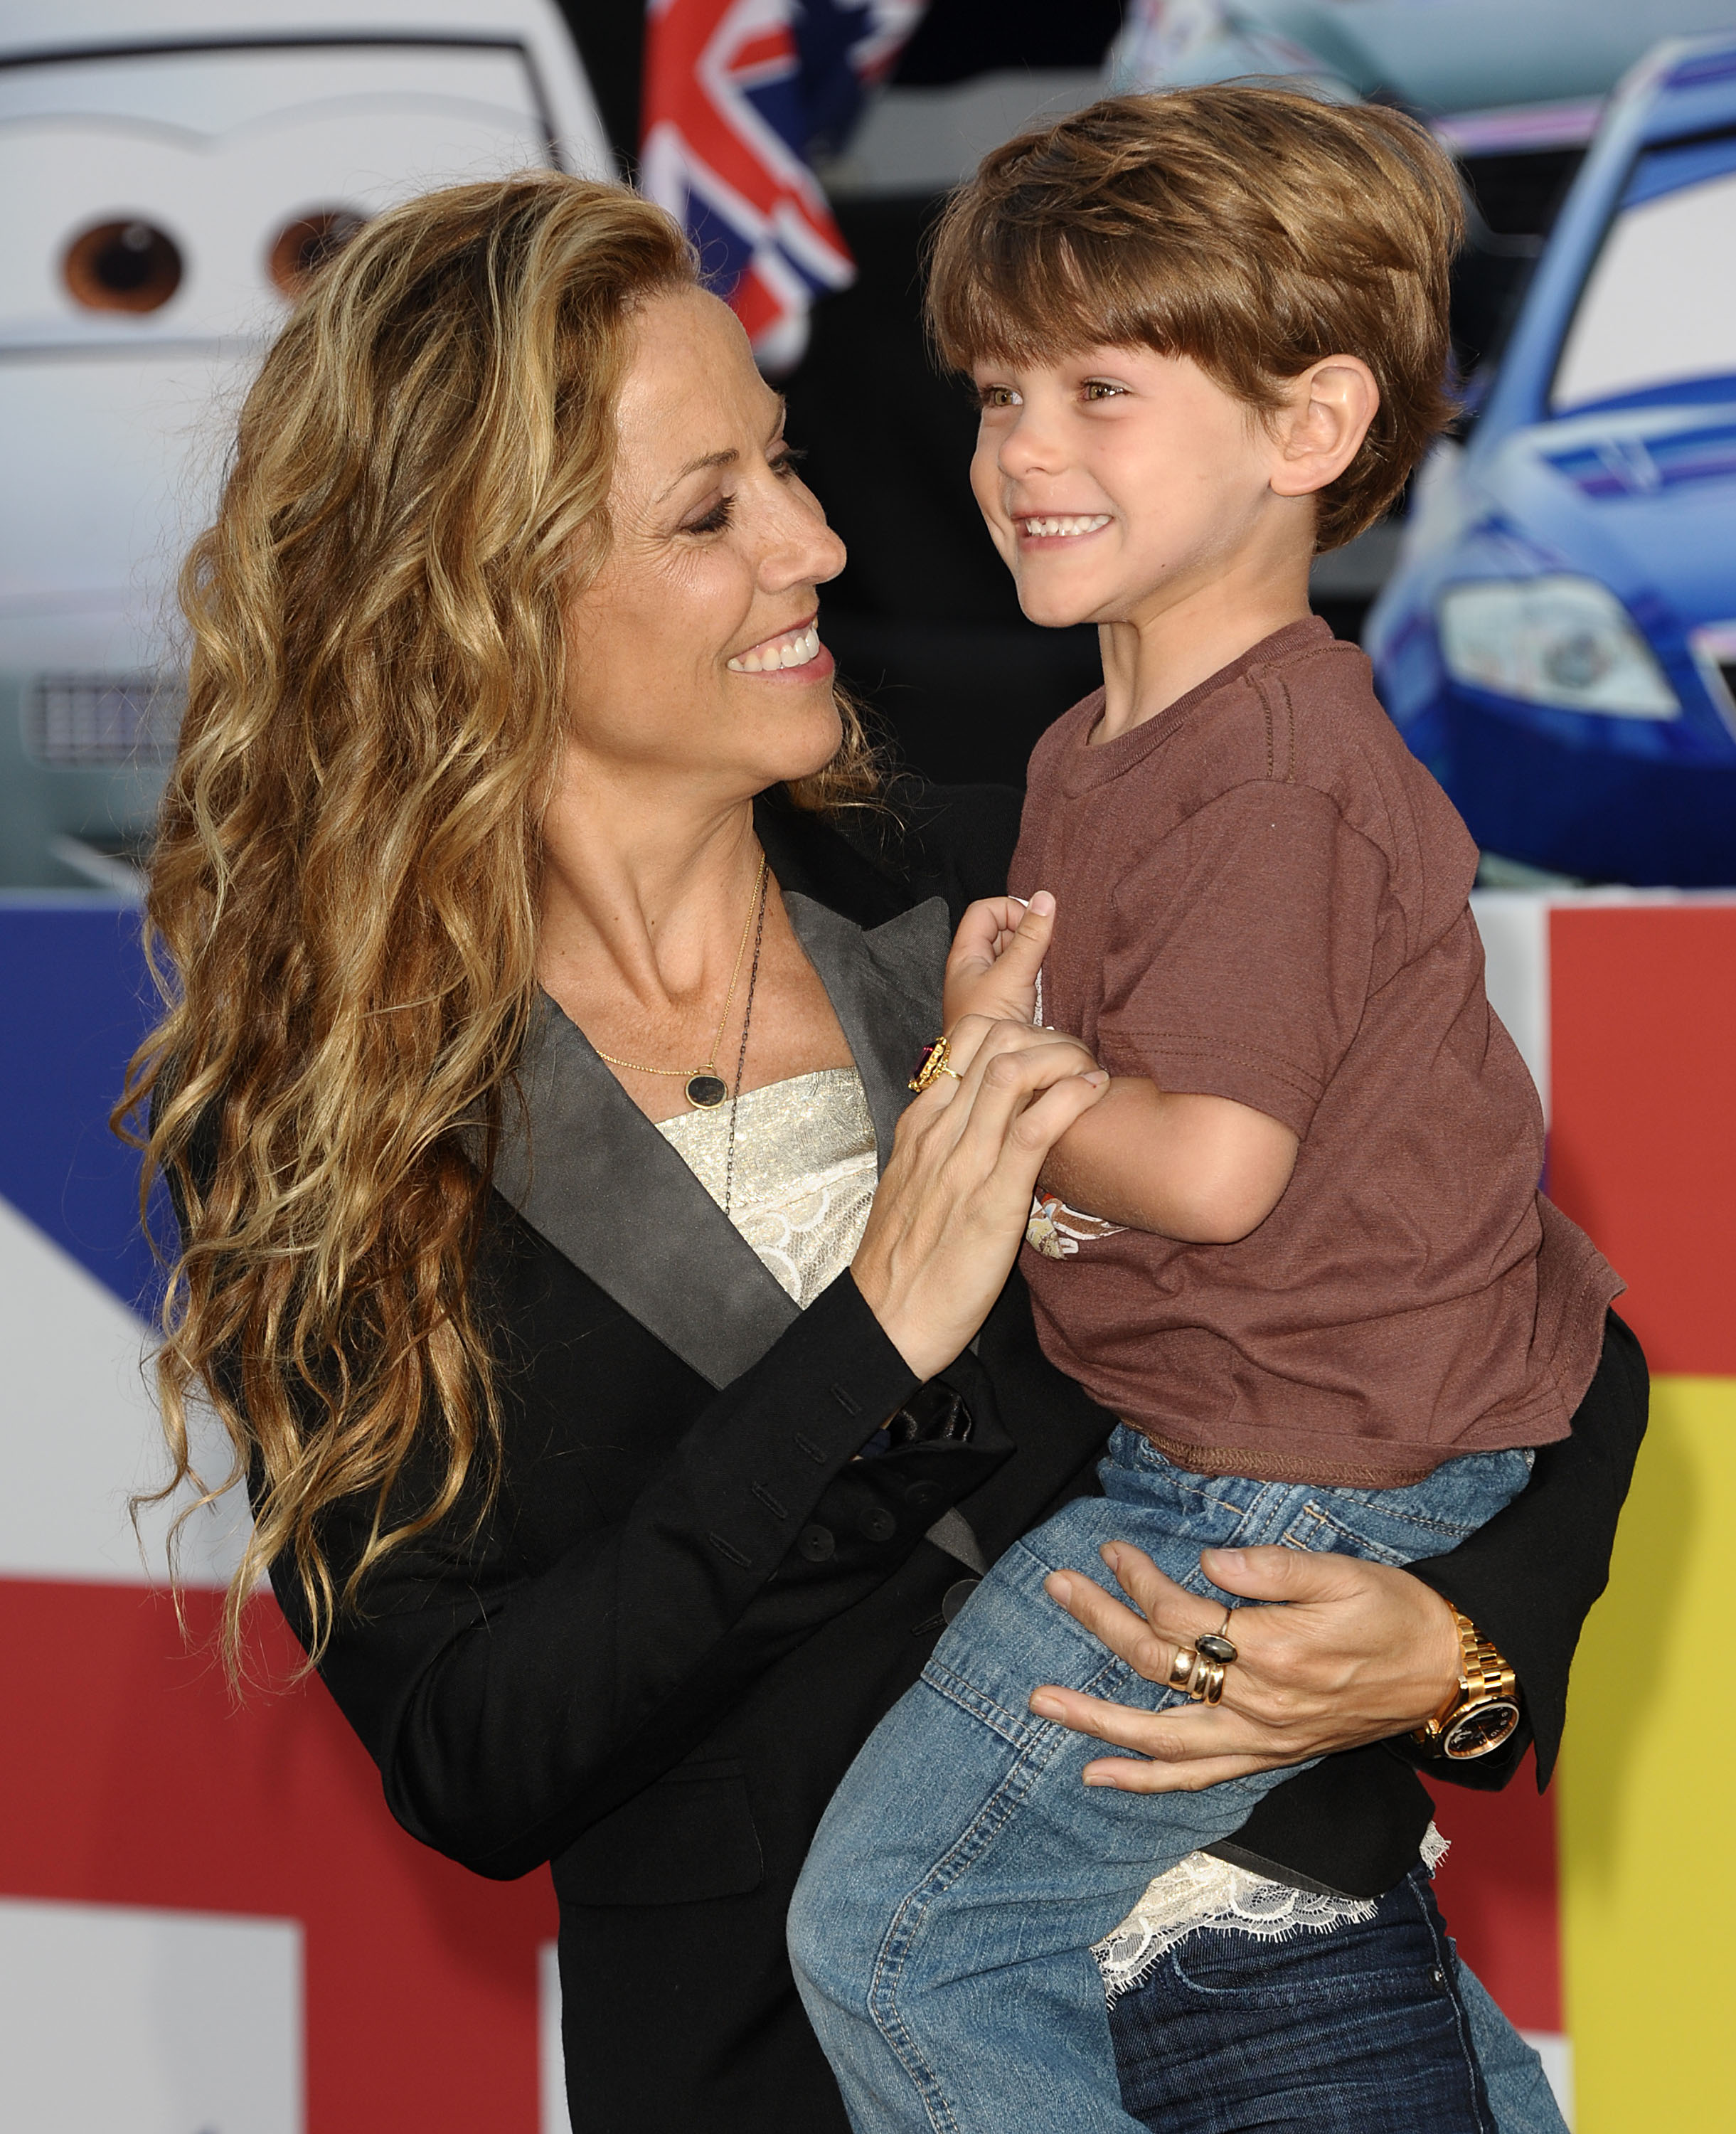 Sheryl Crow and son Wyatt Crow at the El Capitan Theatre on June 18, 2011, in Hollywood, California. | Source: Getty Images